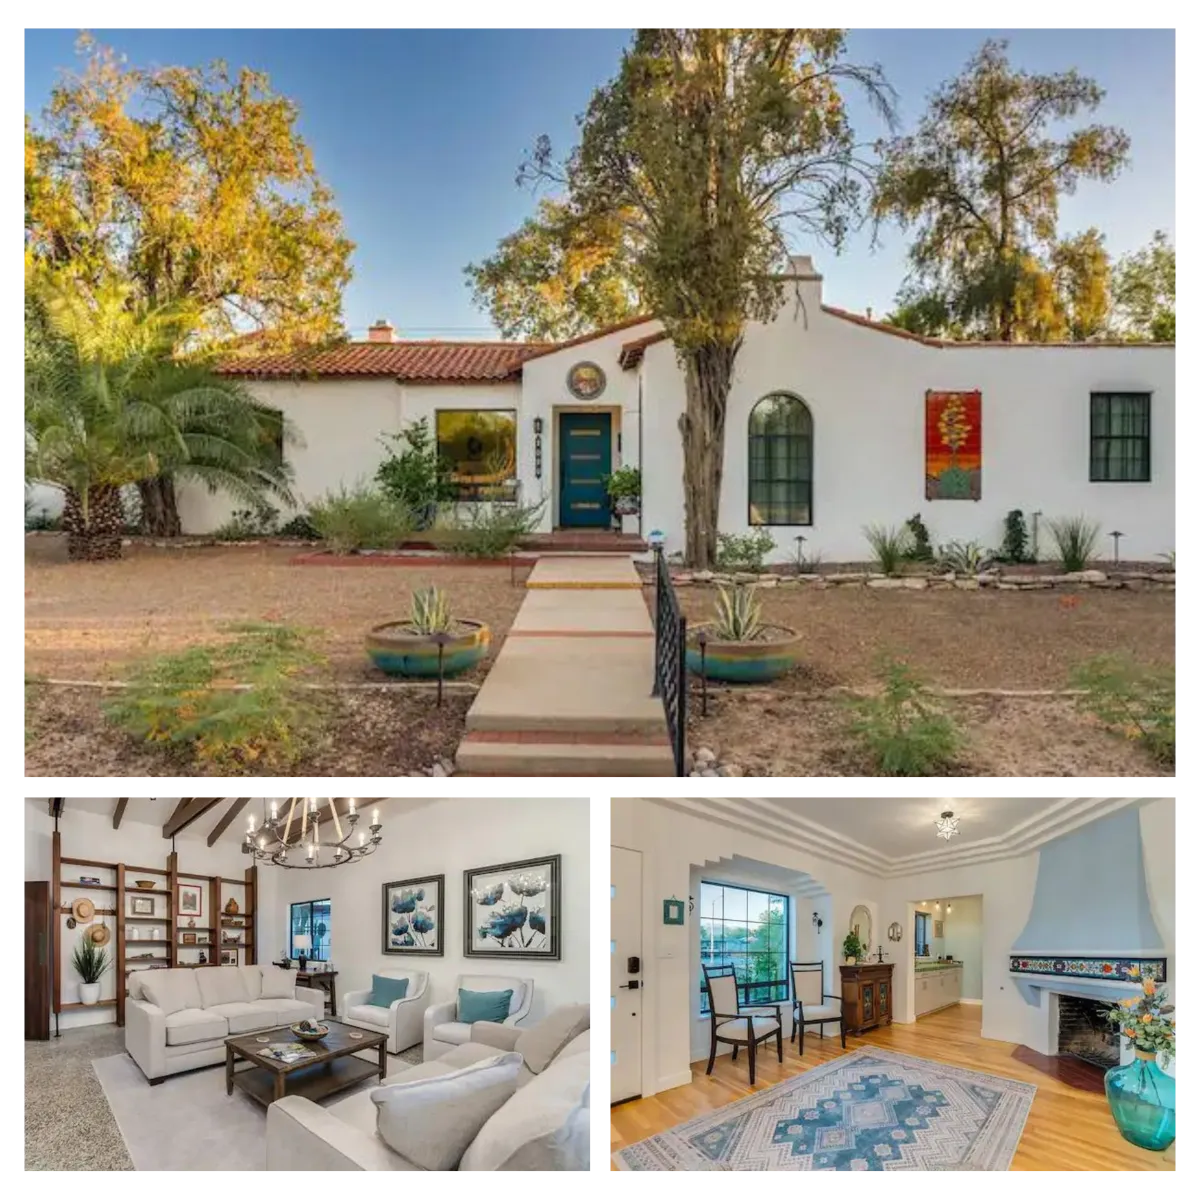 This 1935 Sam Hughes home, managed by the owner, offers prime location, elegance, and comfort for 5 to 10 guests, featuring a charming great room and patio, ideal for a unique and luxurious Hacienda stay.